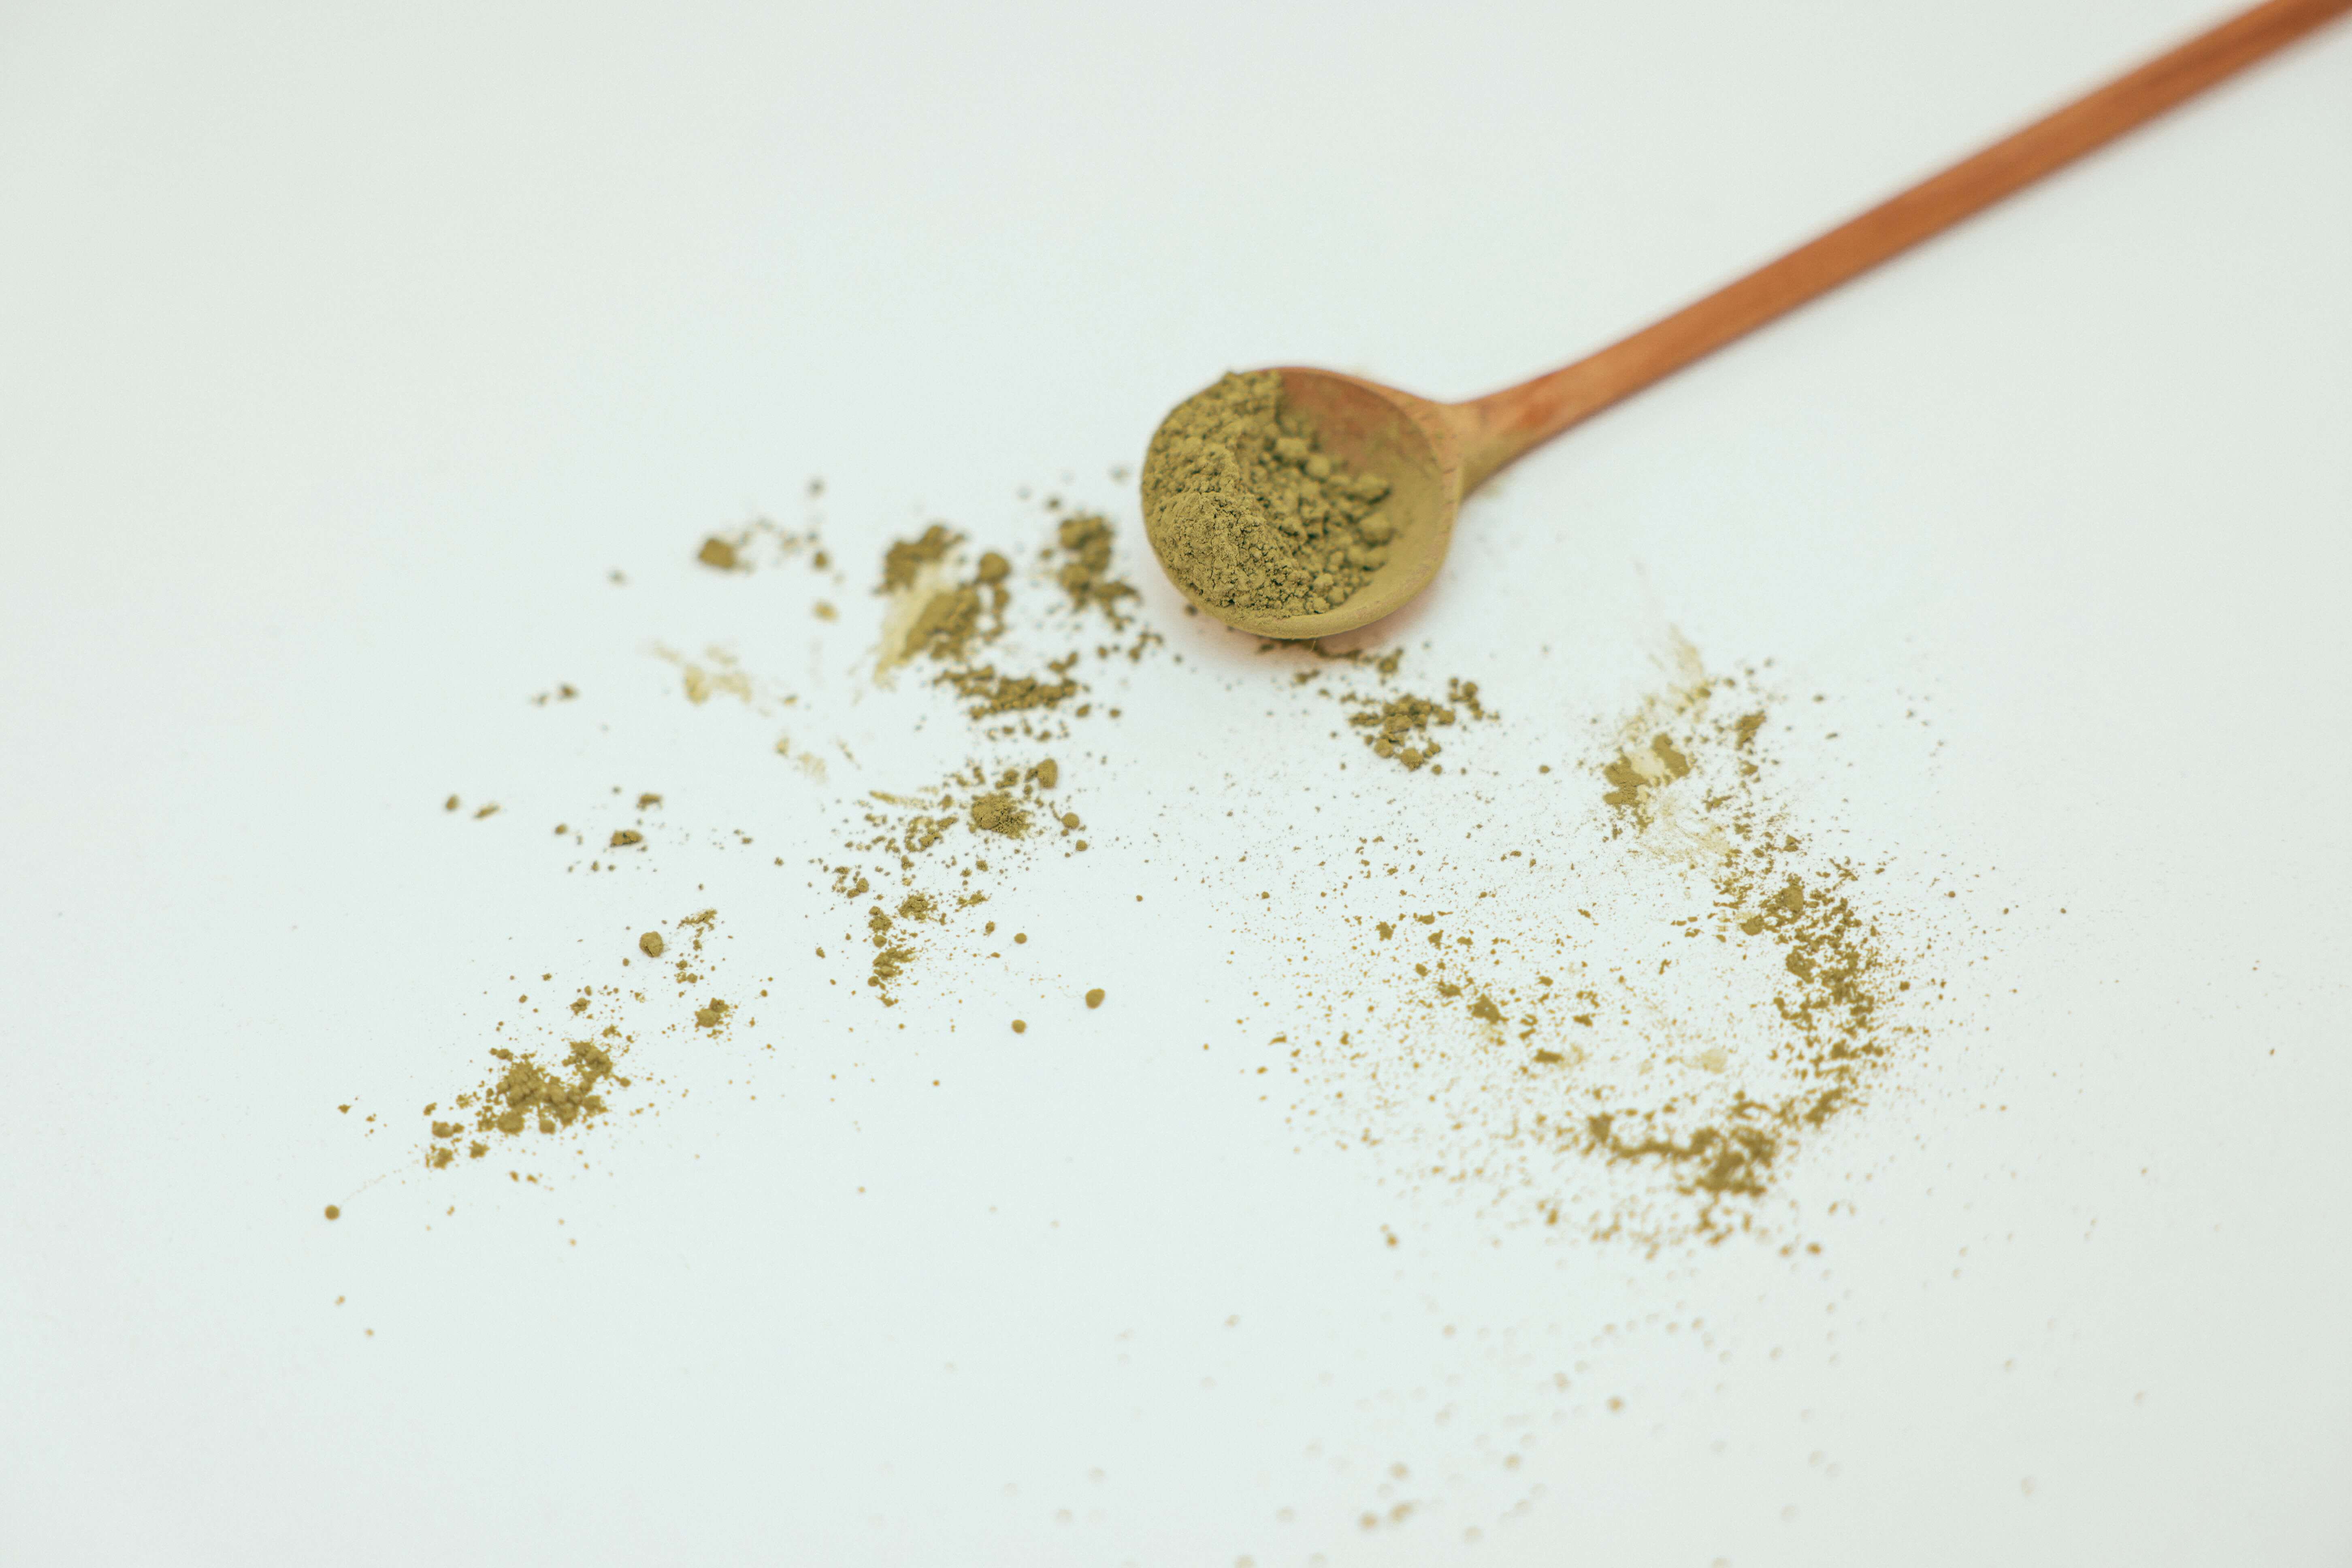 brown wooden spoon with kratom powder on white surface